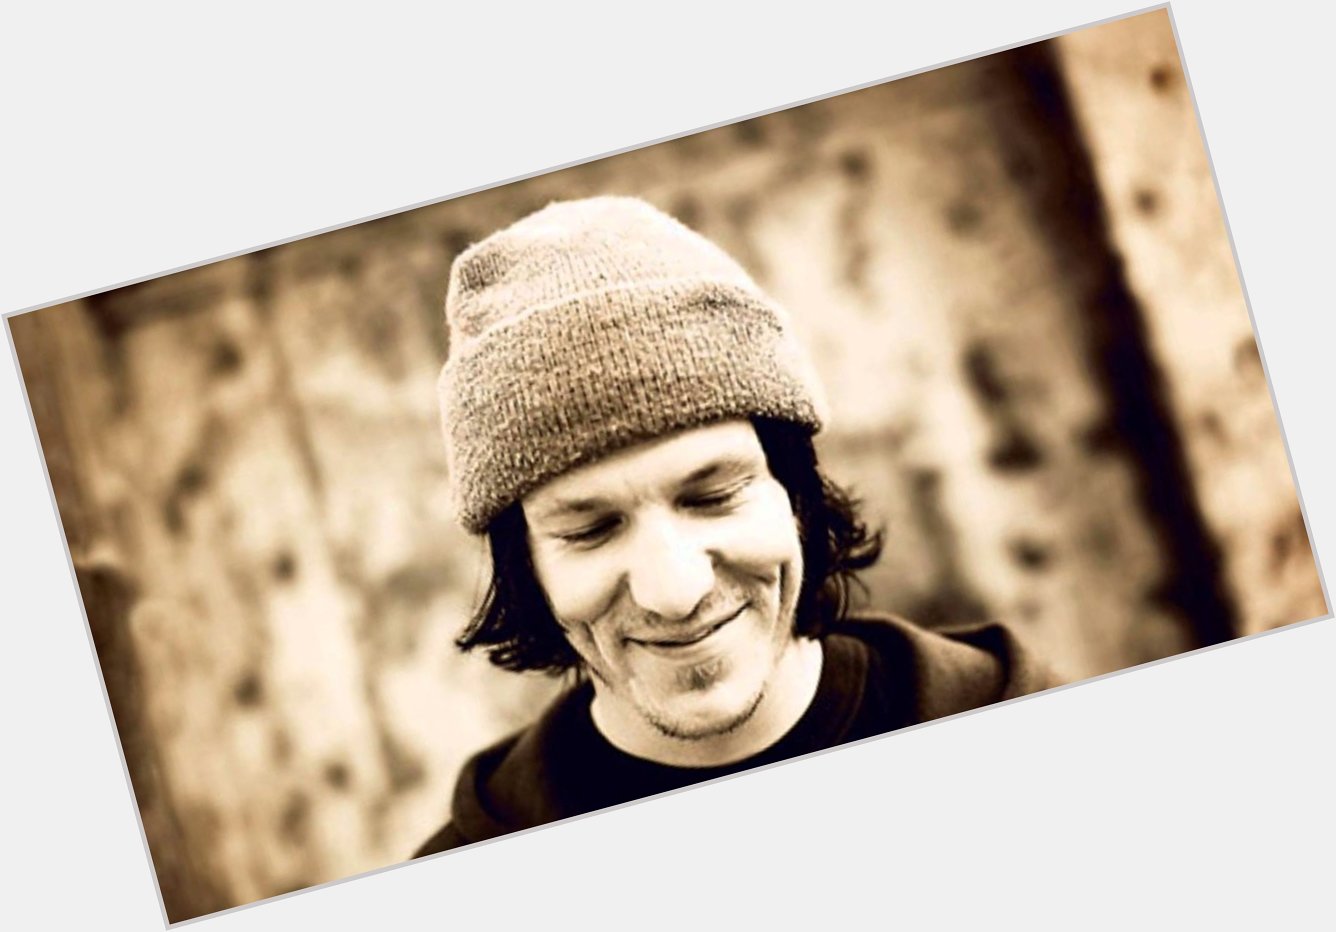 Happy Birthday Elliott Smith

Your music kept me alive

Rest in peace 